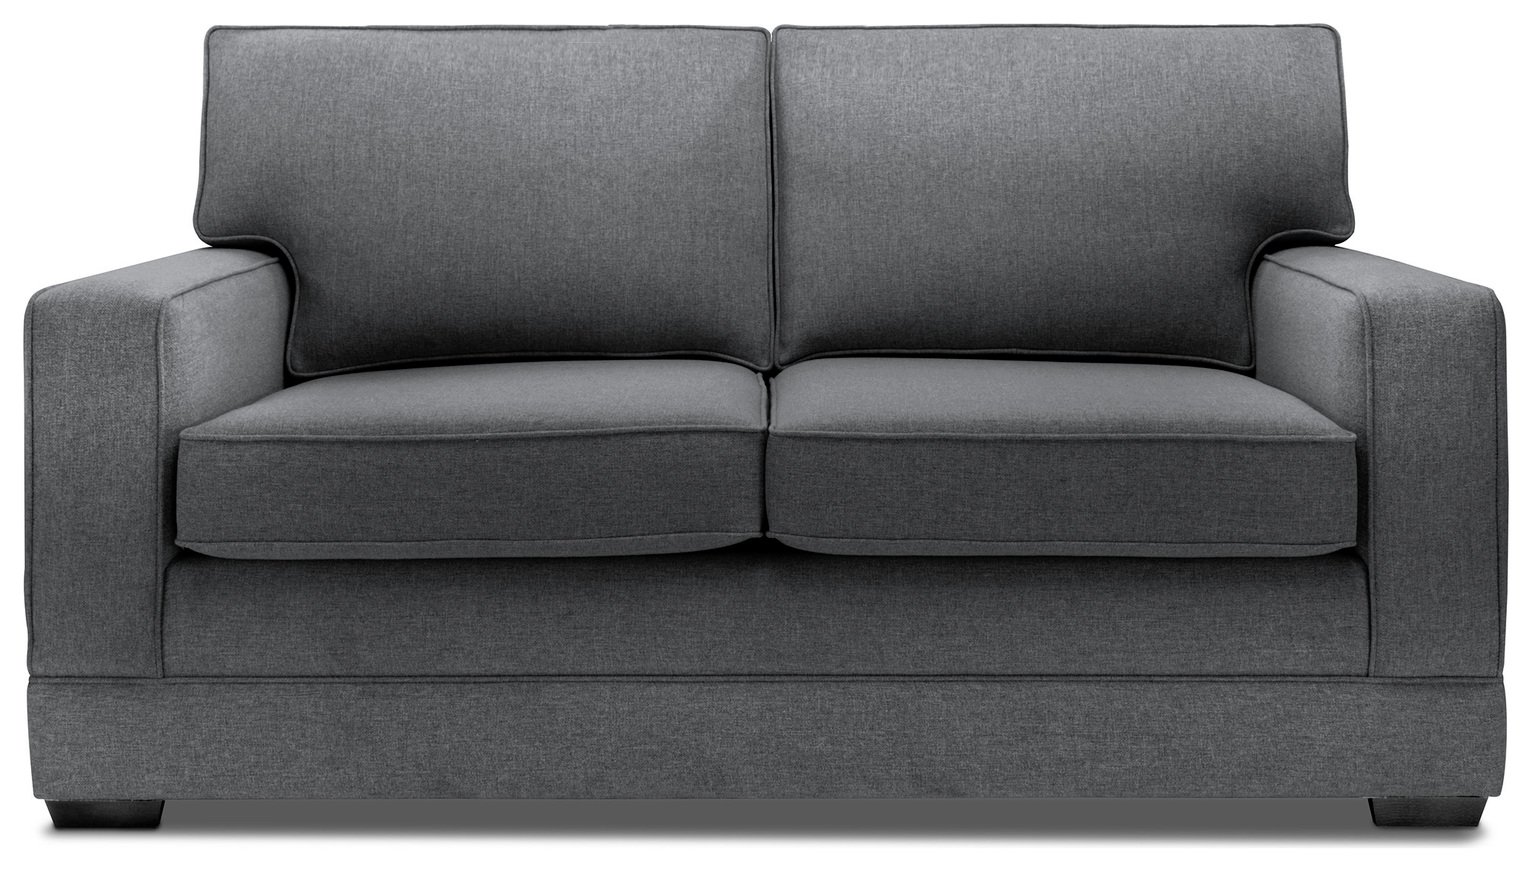 Jay-Be Modern Fabric 2 Seater Sofabed - Slate